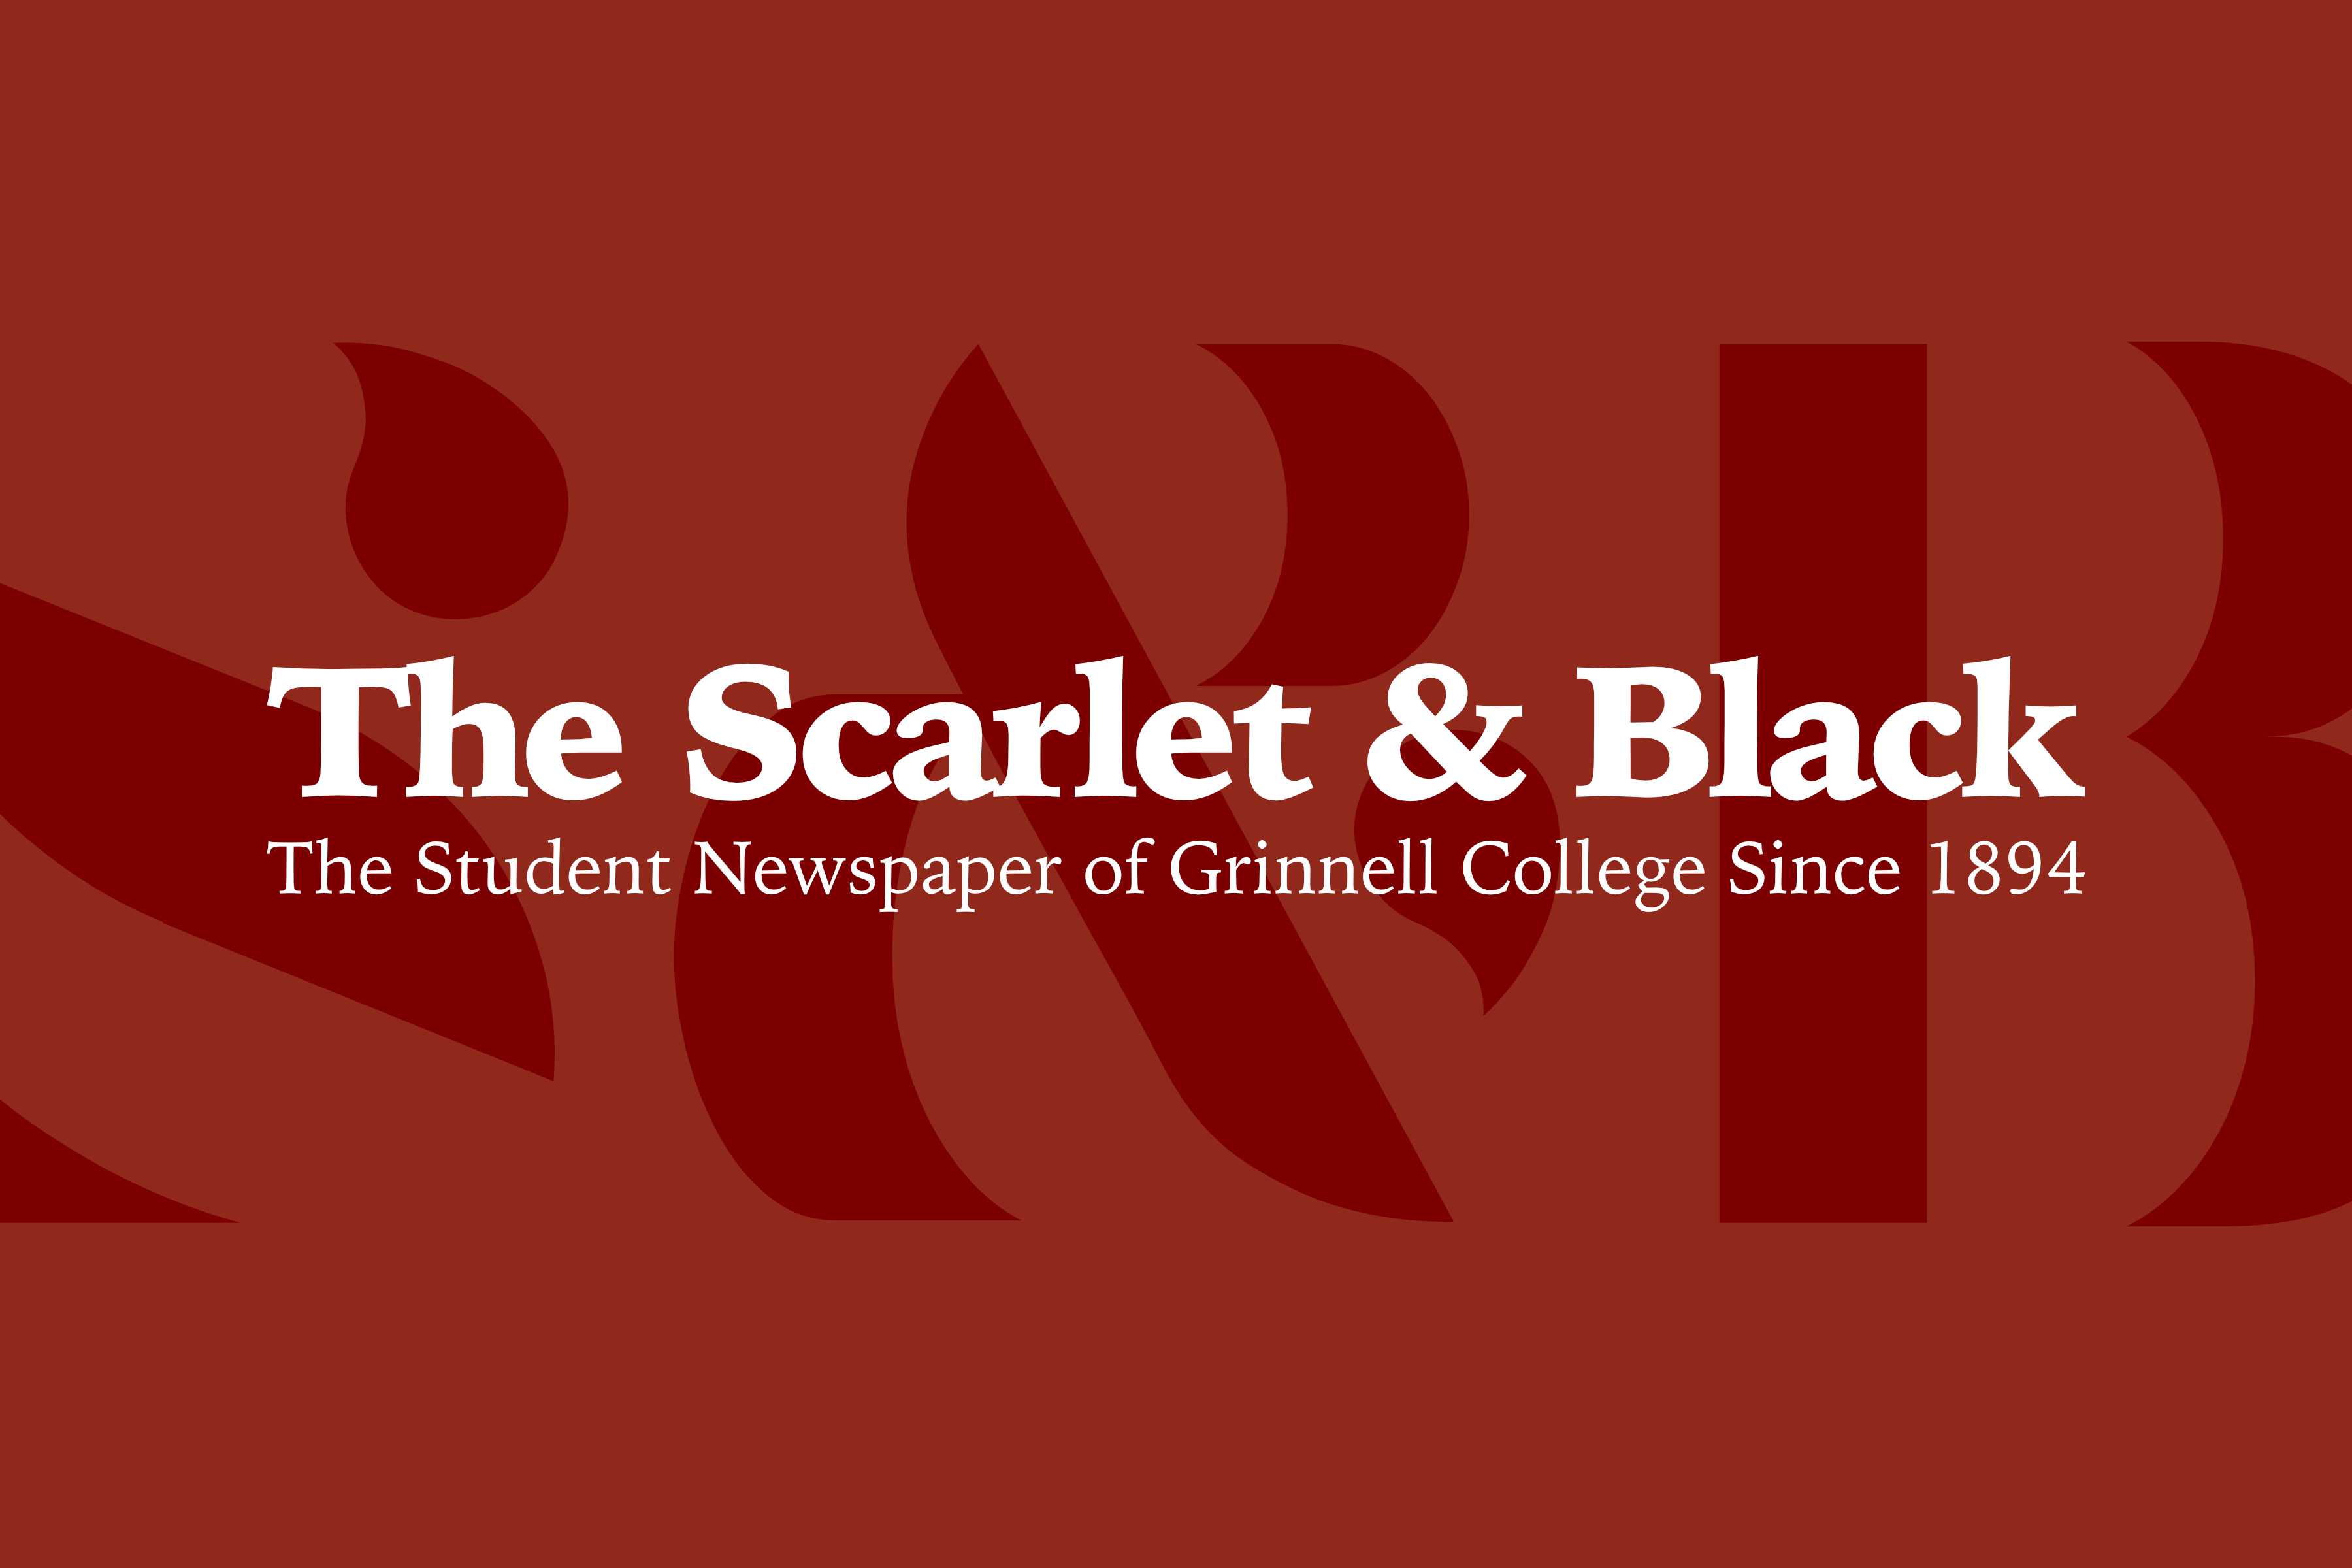 About – The Scarlet & Black